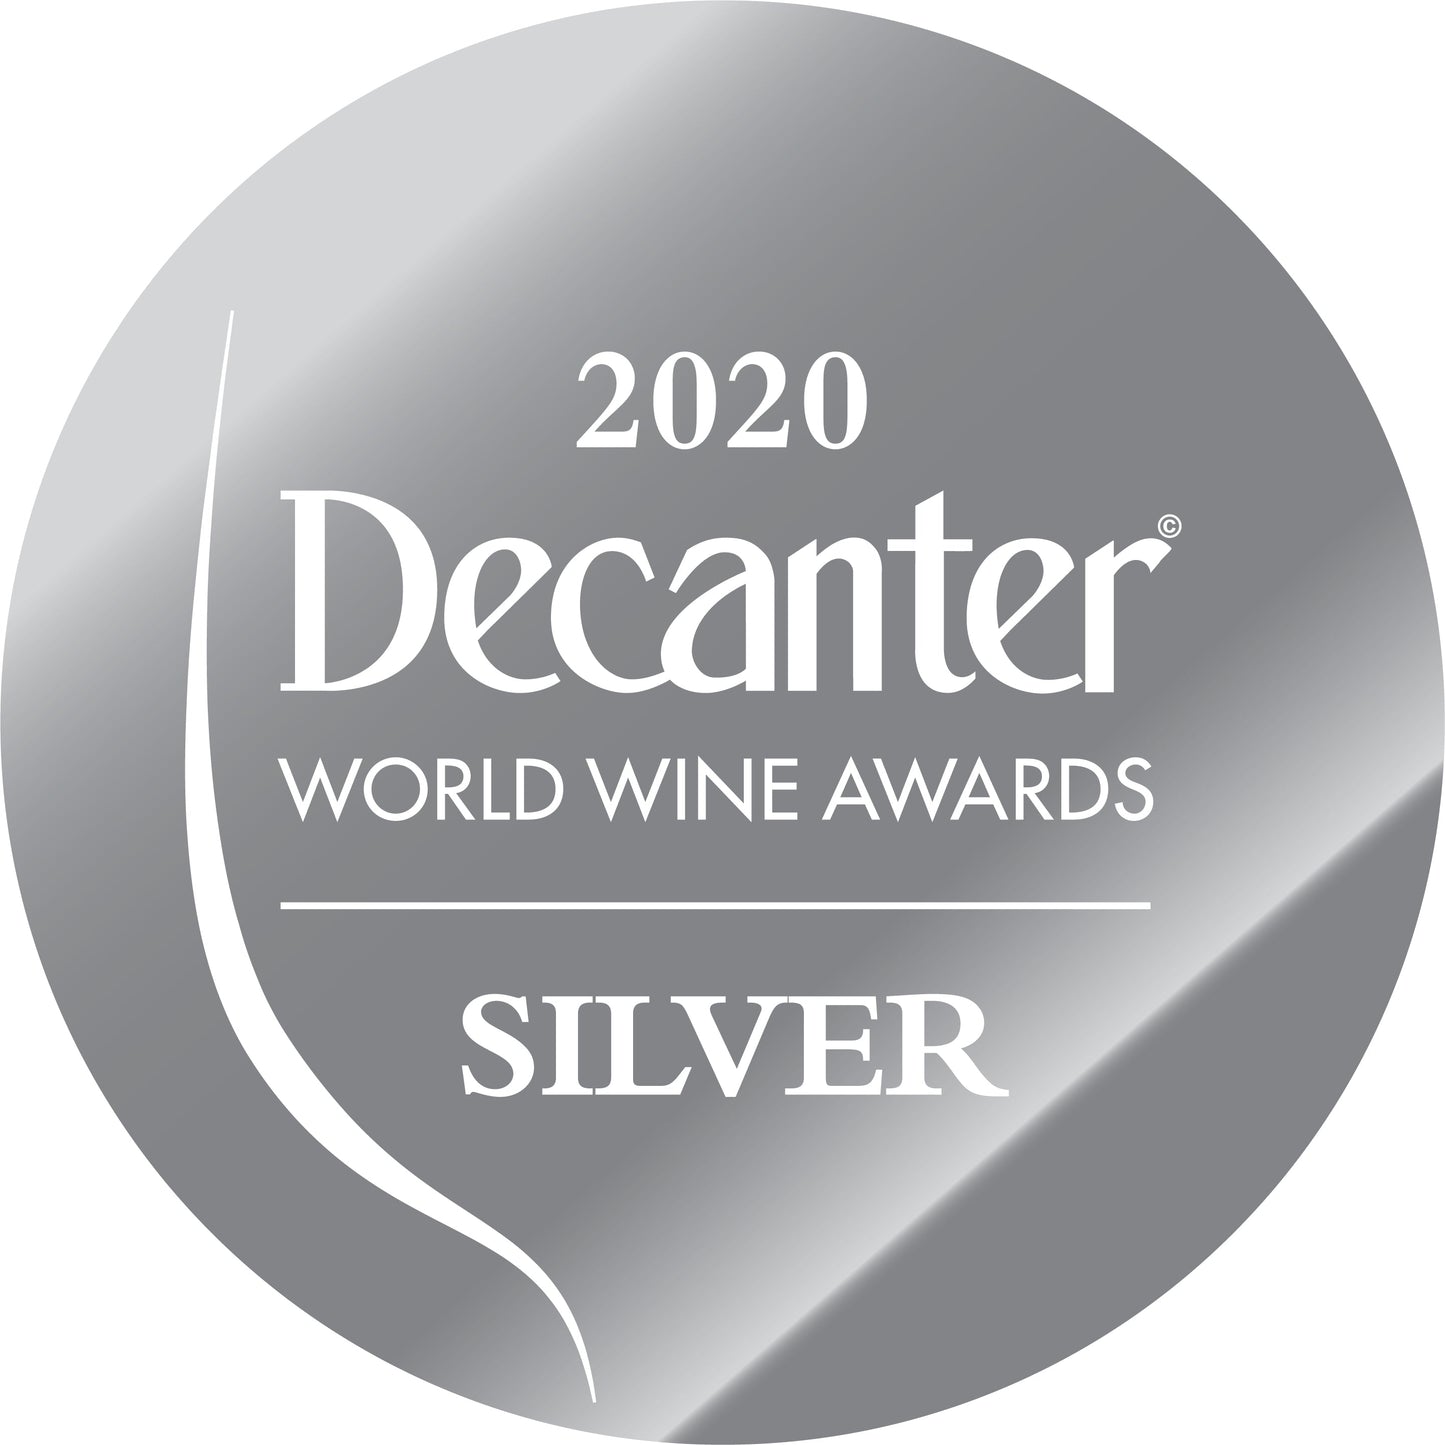 DWWA 2020 Silver GENERIC - Copyright of the medal artwork for 1000 labels